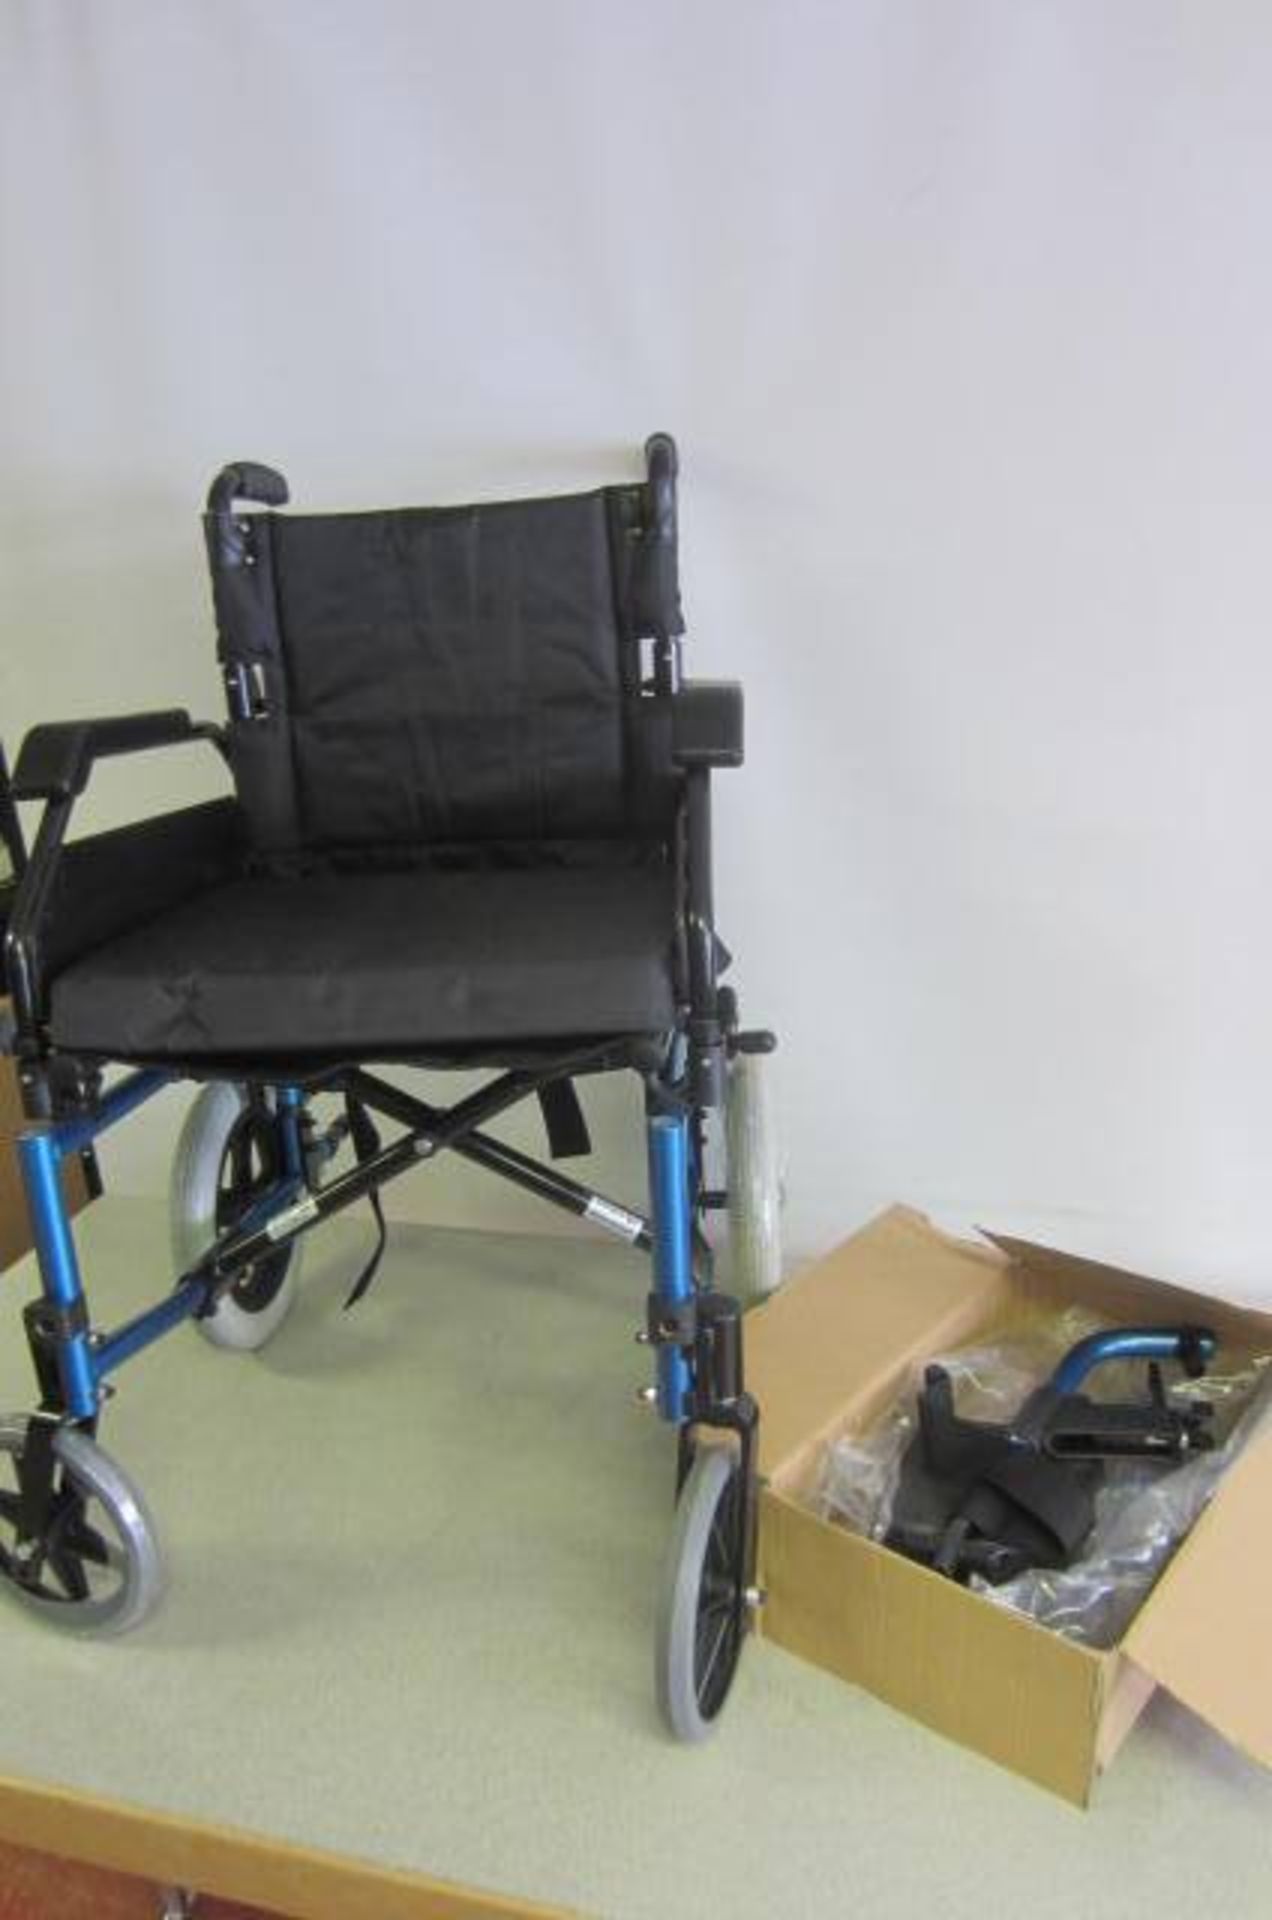 Roma Medical Lightweight Car Transit Wheel Chair, Model 1530BL. In Box As New. RRP £255.00